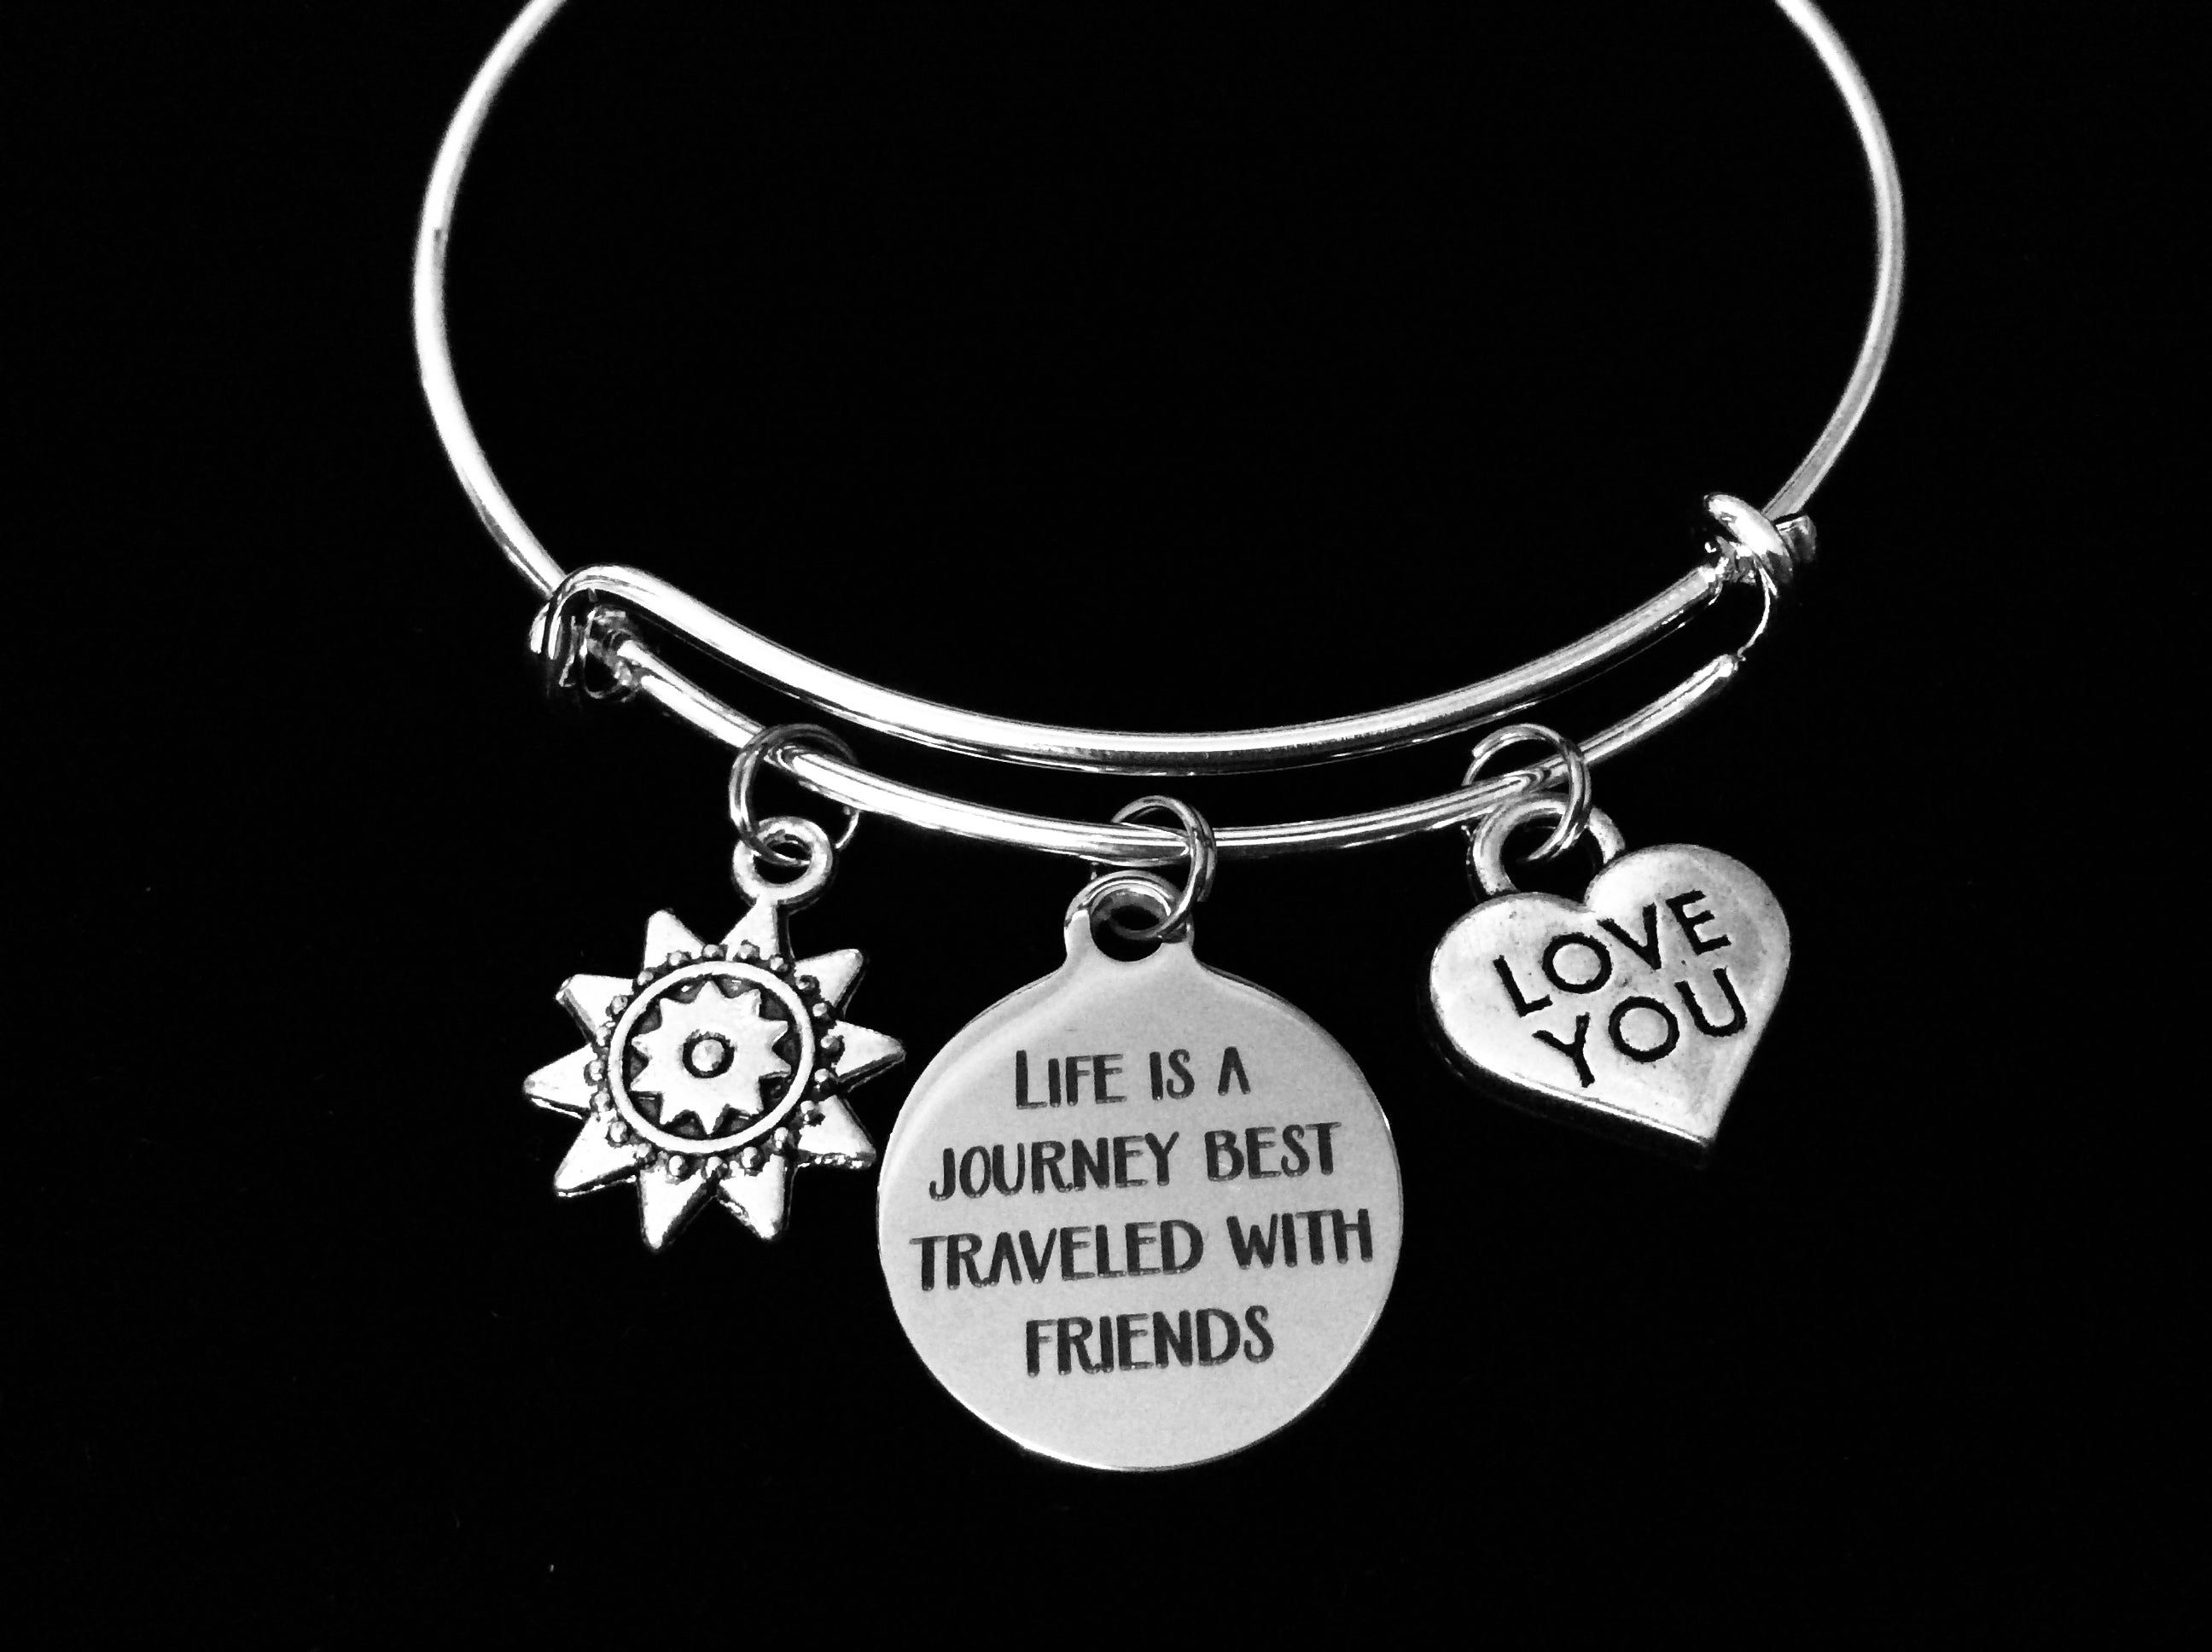 Life is a Journey Best Traveled With Friends Expandable Charm Br